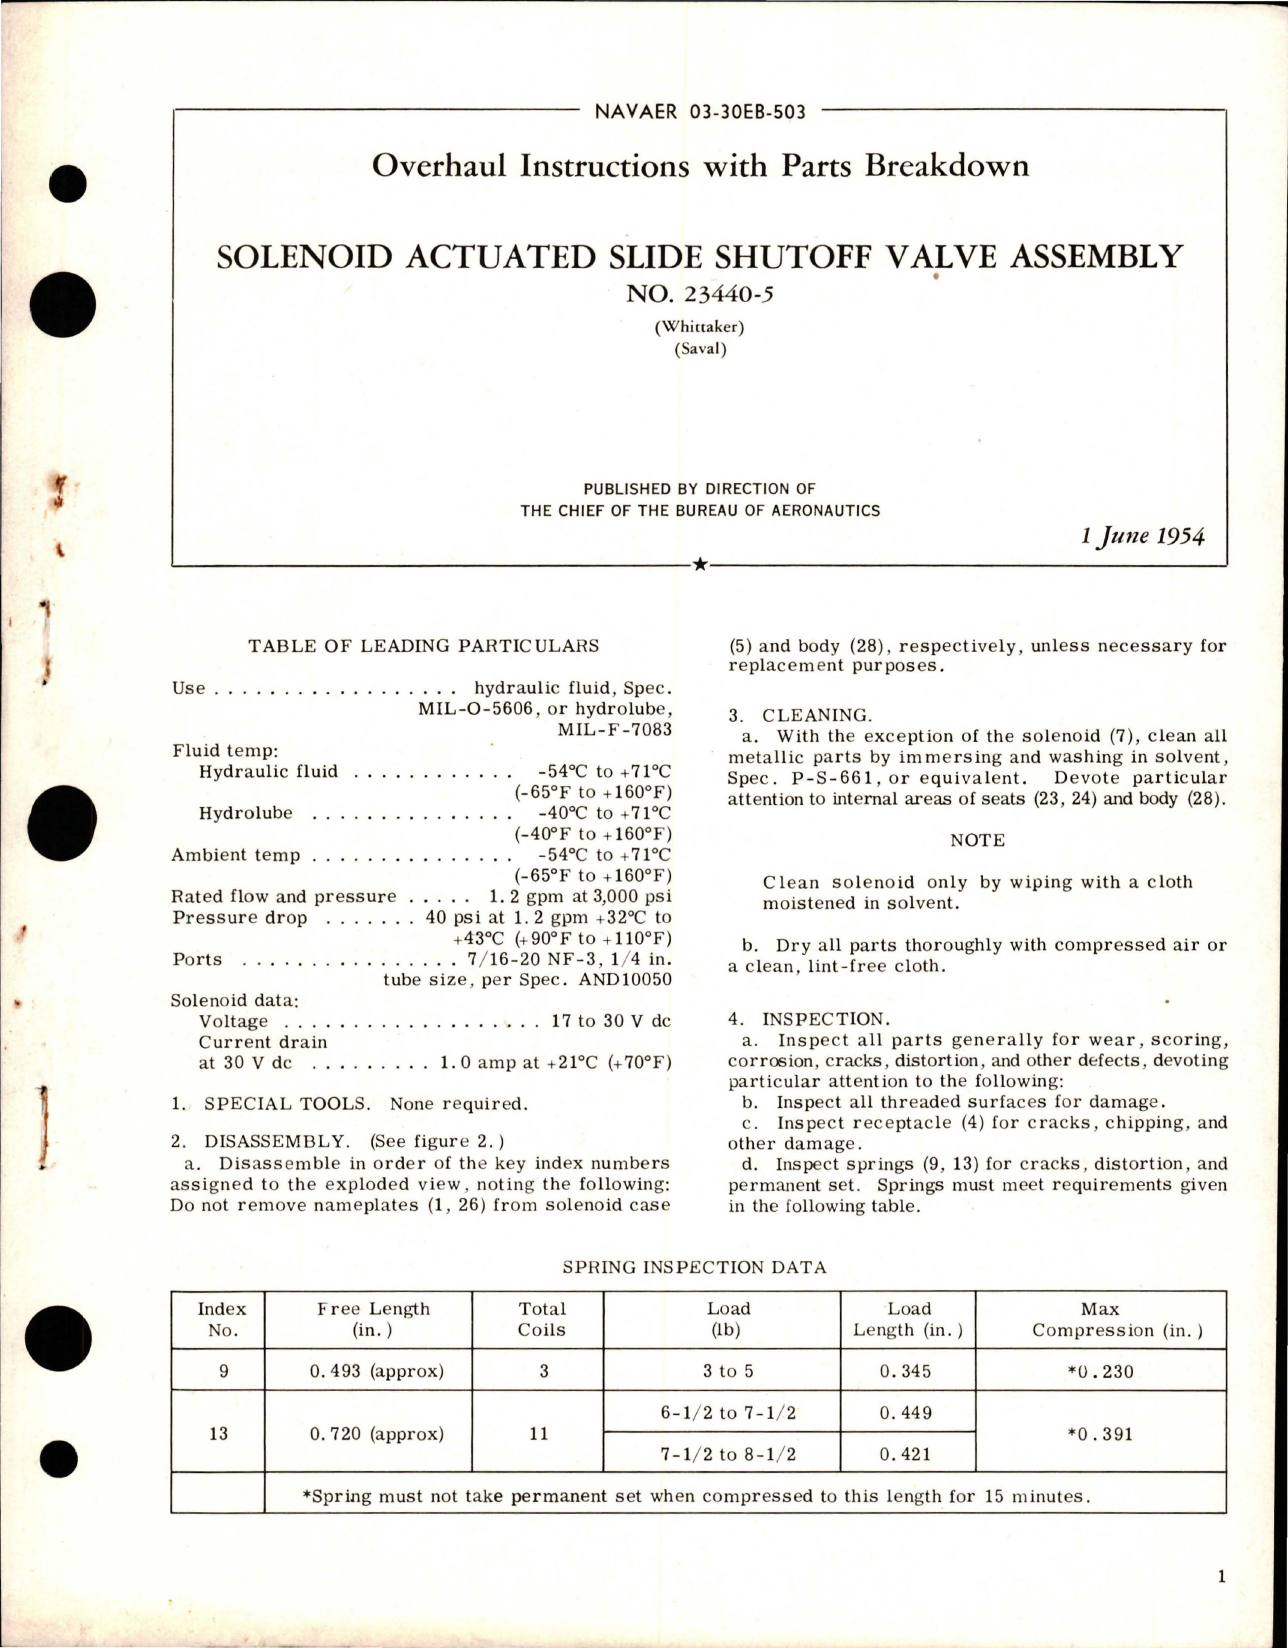 Sample page 1 from AirCorps Library document: Overhaul Instructions with Pars for Solenoid Actuated Slide Shutoff Valve Assembly - 23440-5